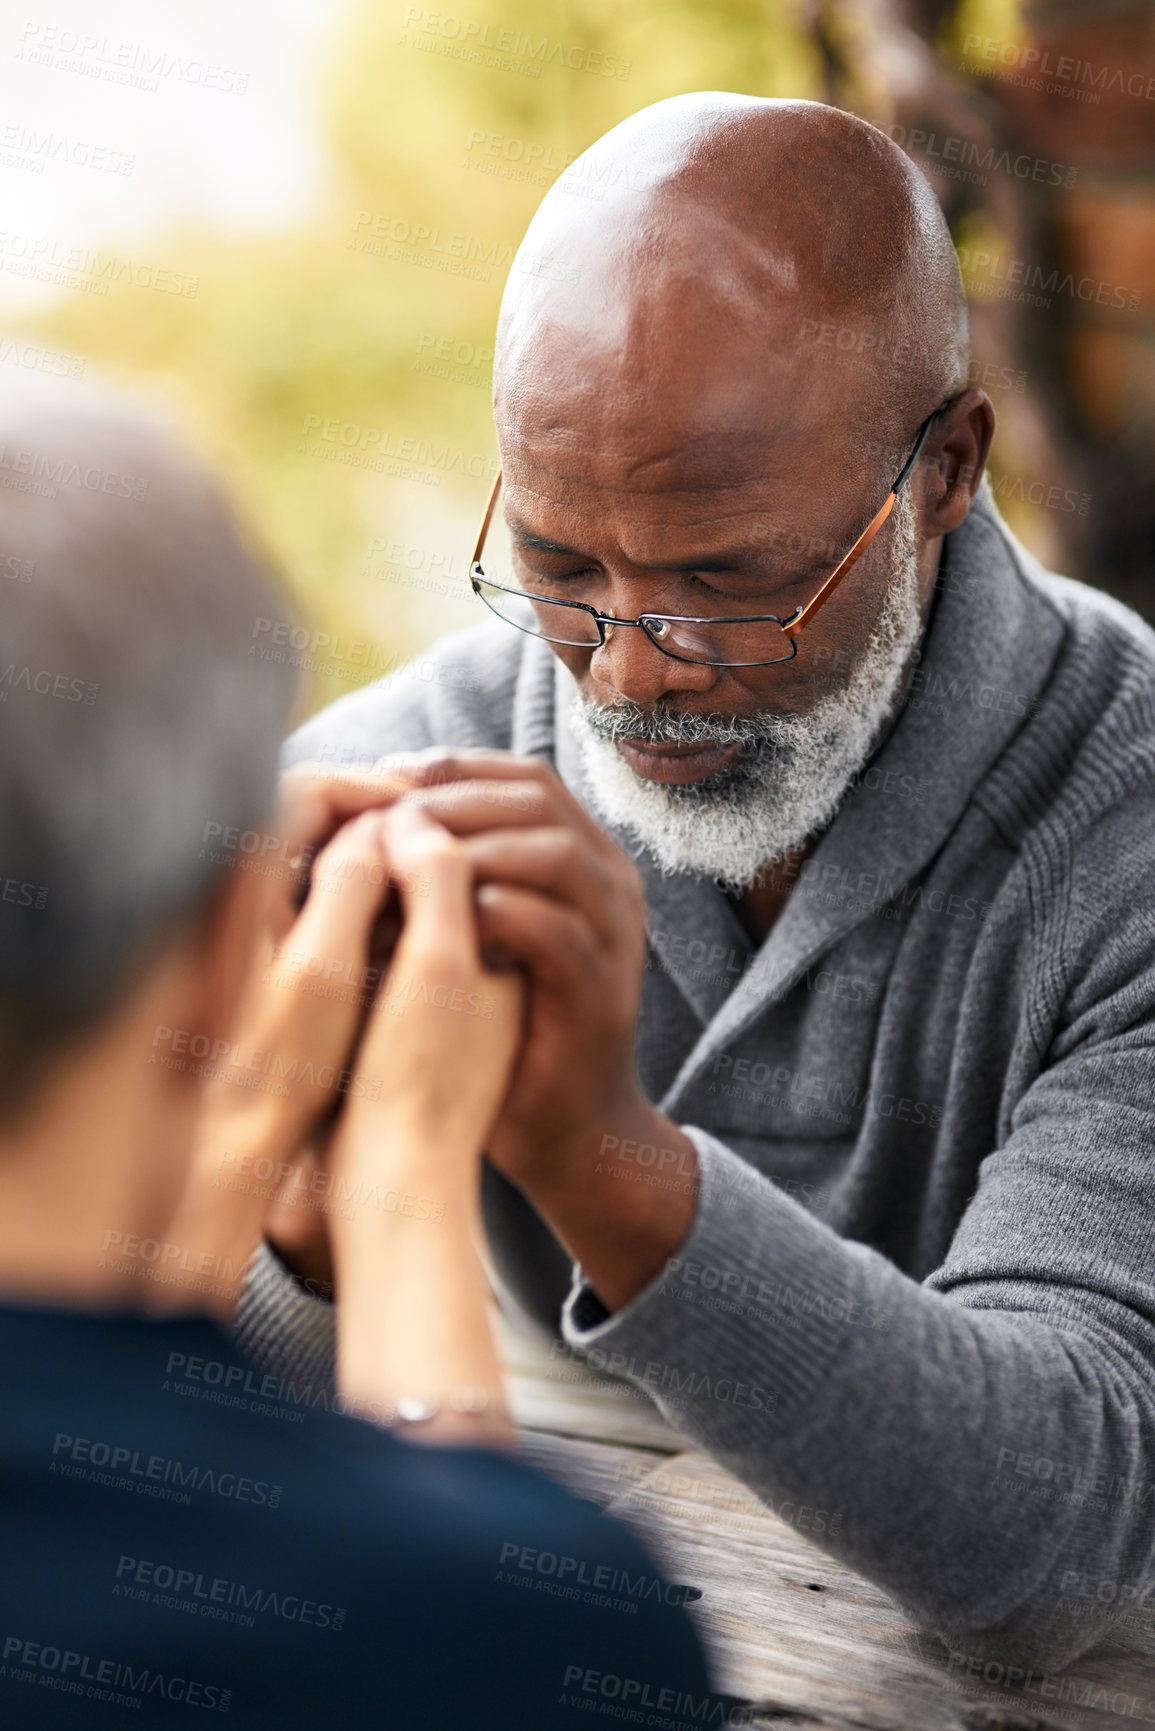 Buy stock photo Cropped shot of a senior couple holding hands in prayer while sitting outside